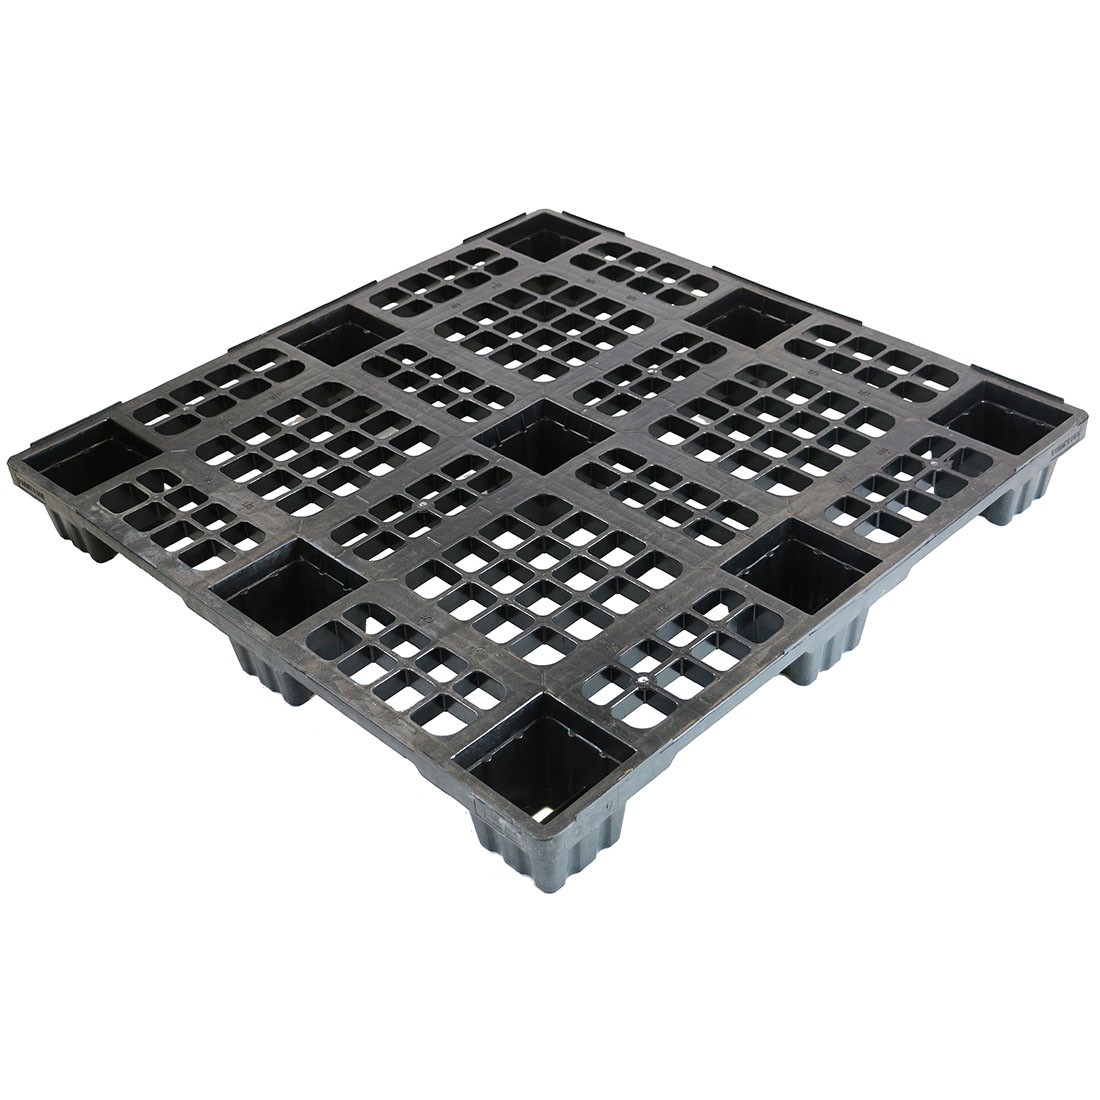 40 x 48 Stackable Plastic FDA Pallet w/ Safety Lip - Green